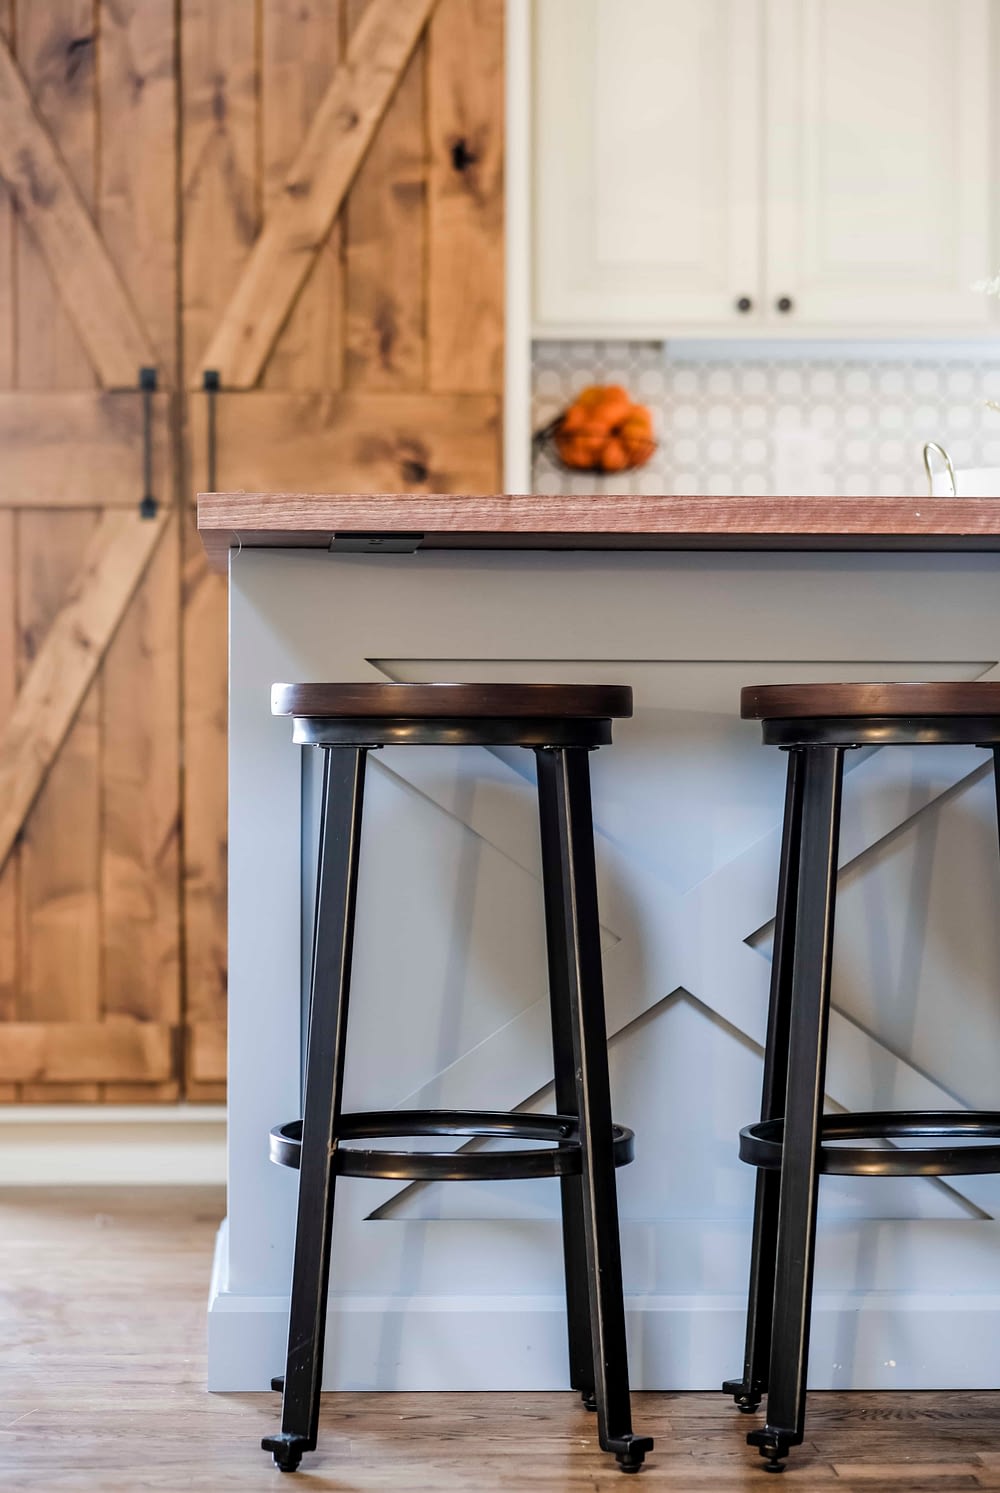 Rustic bar stools in front of a blue kitchen island